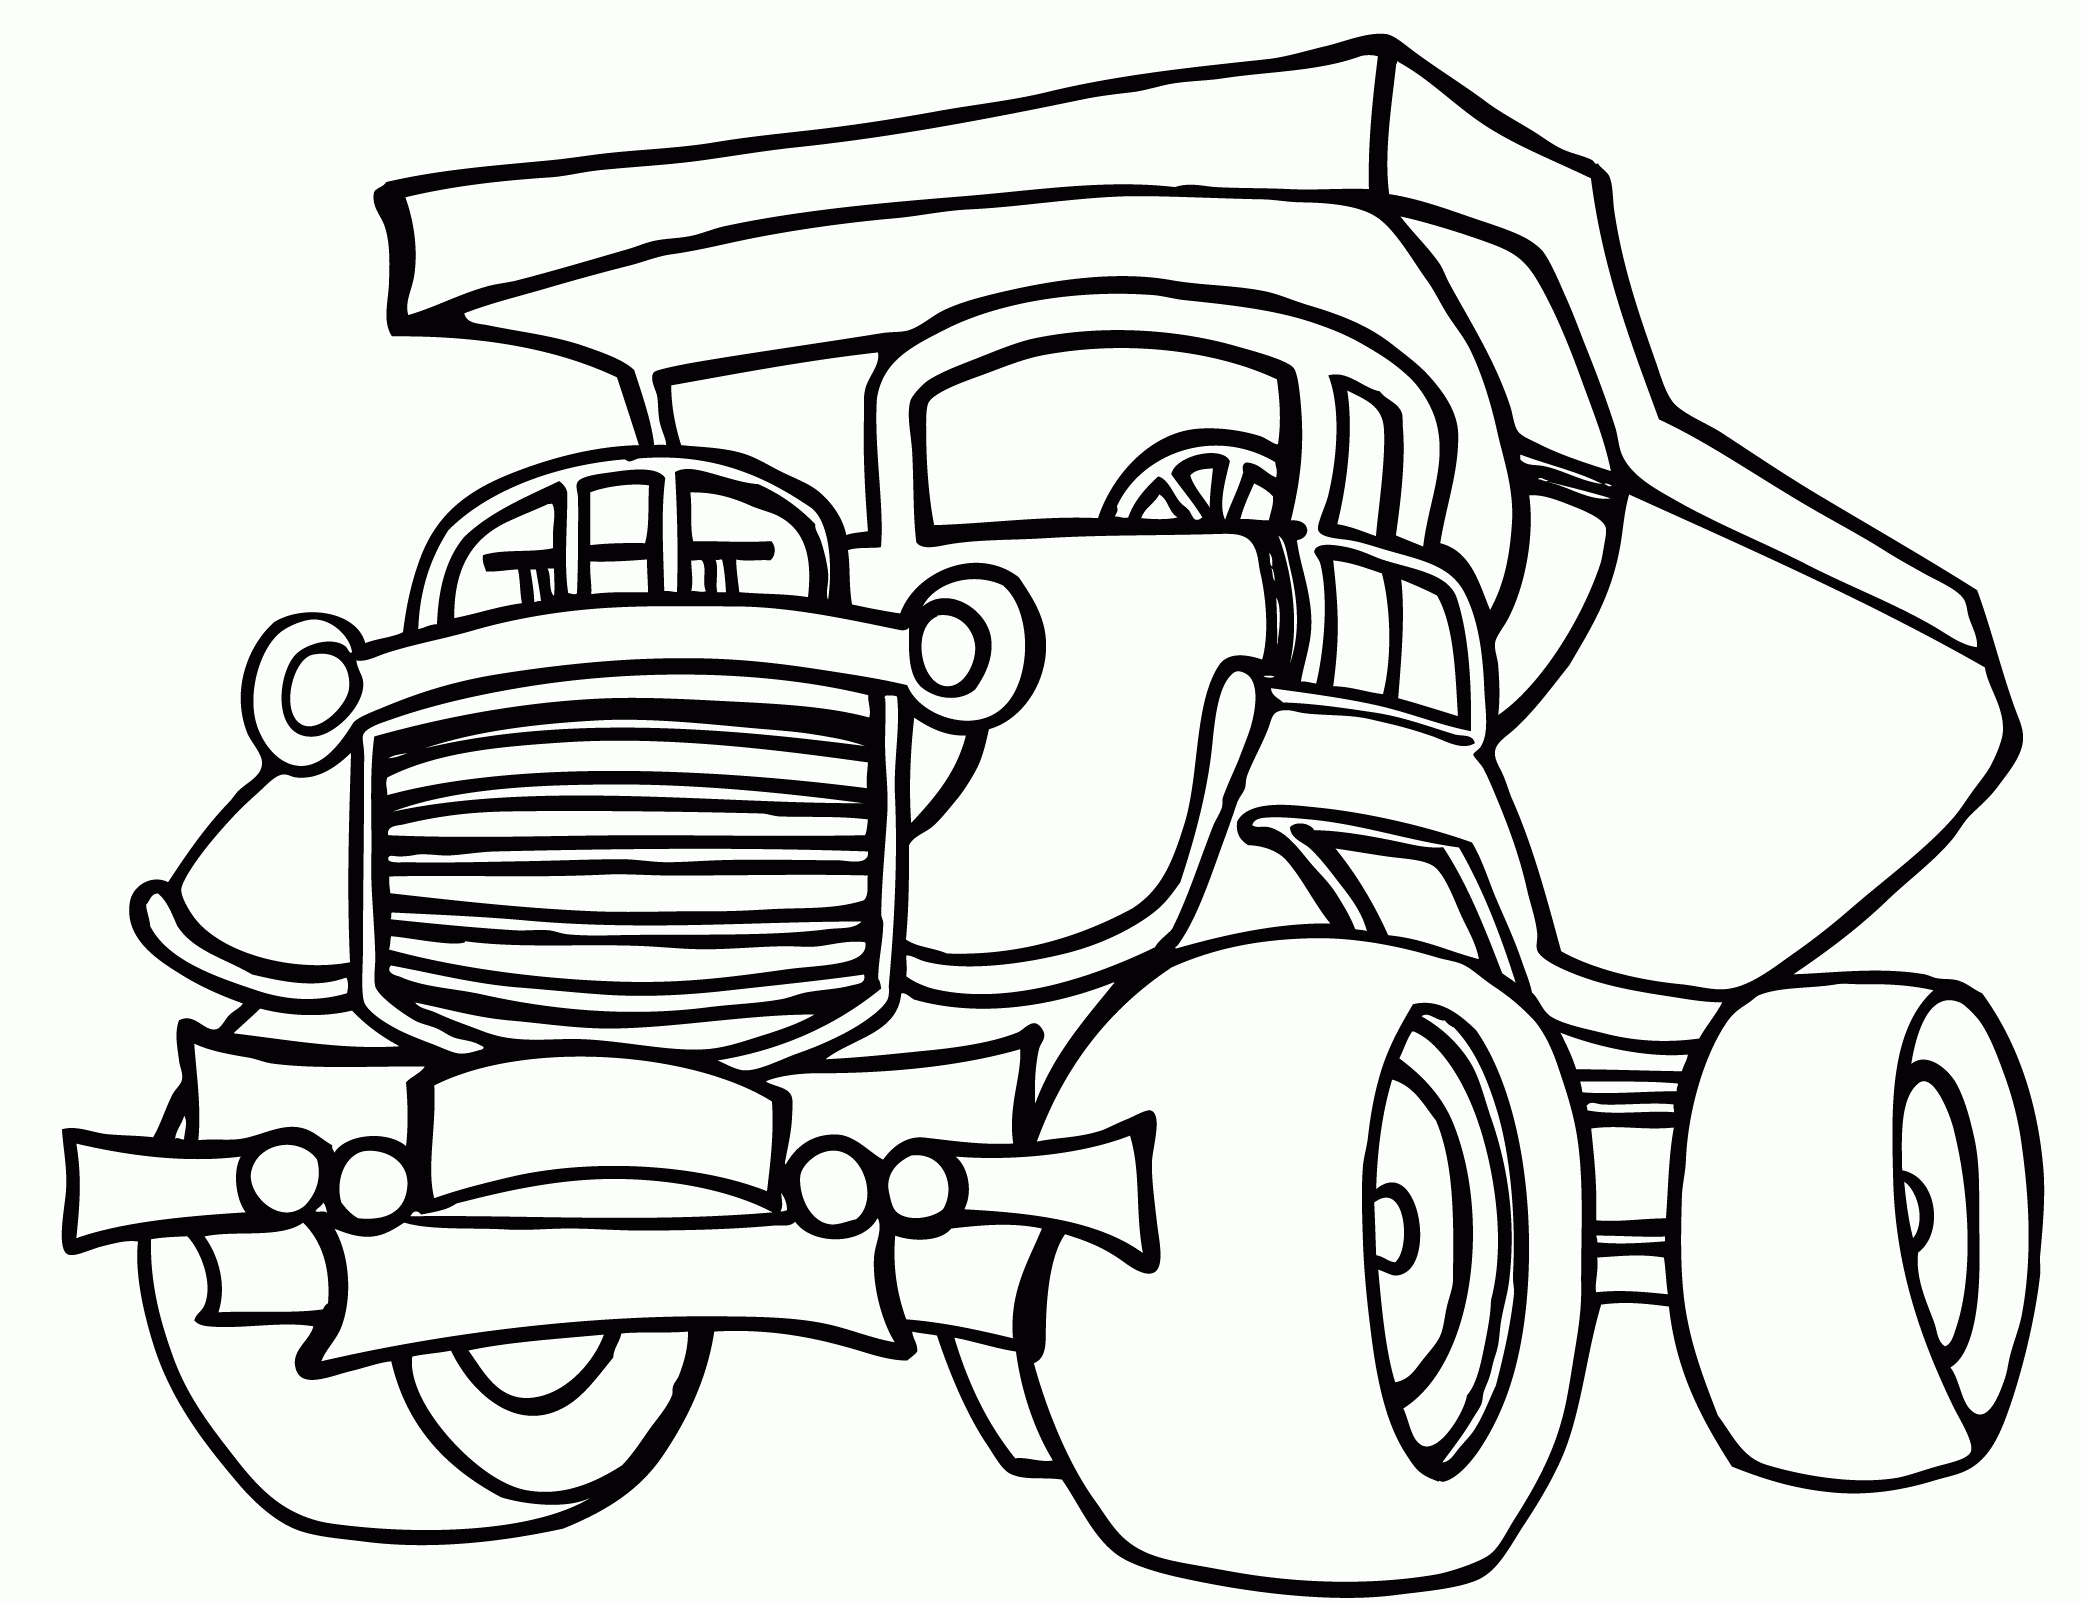 1500 Truck Coloring Pages Printable Sheets How To Draw A Truck 2021 09 382 Coloring4free